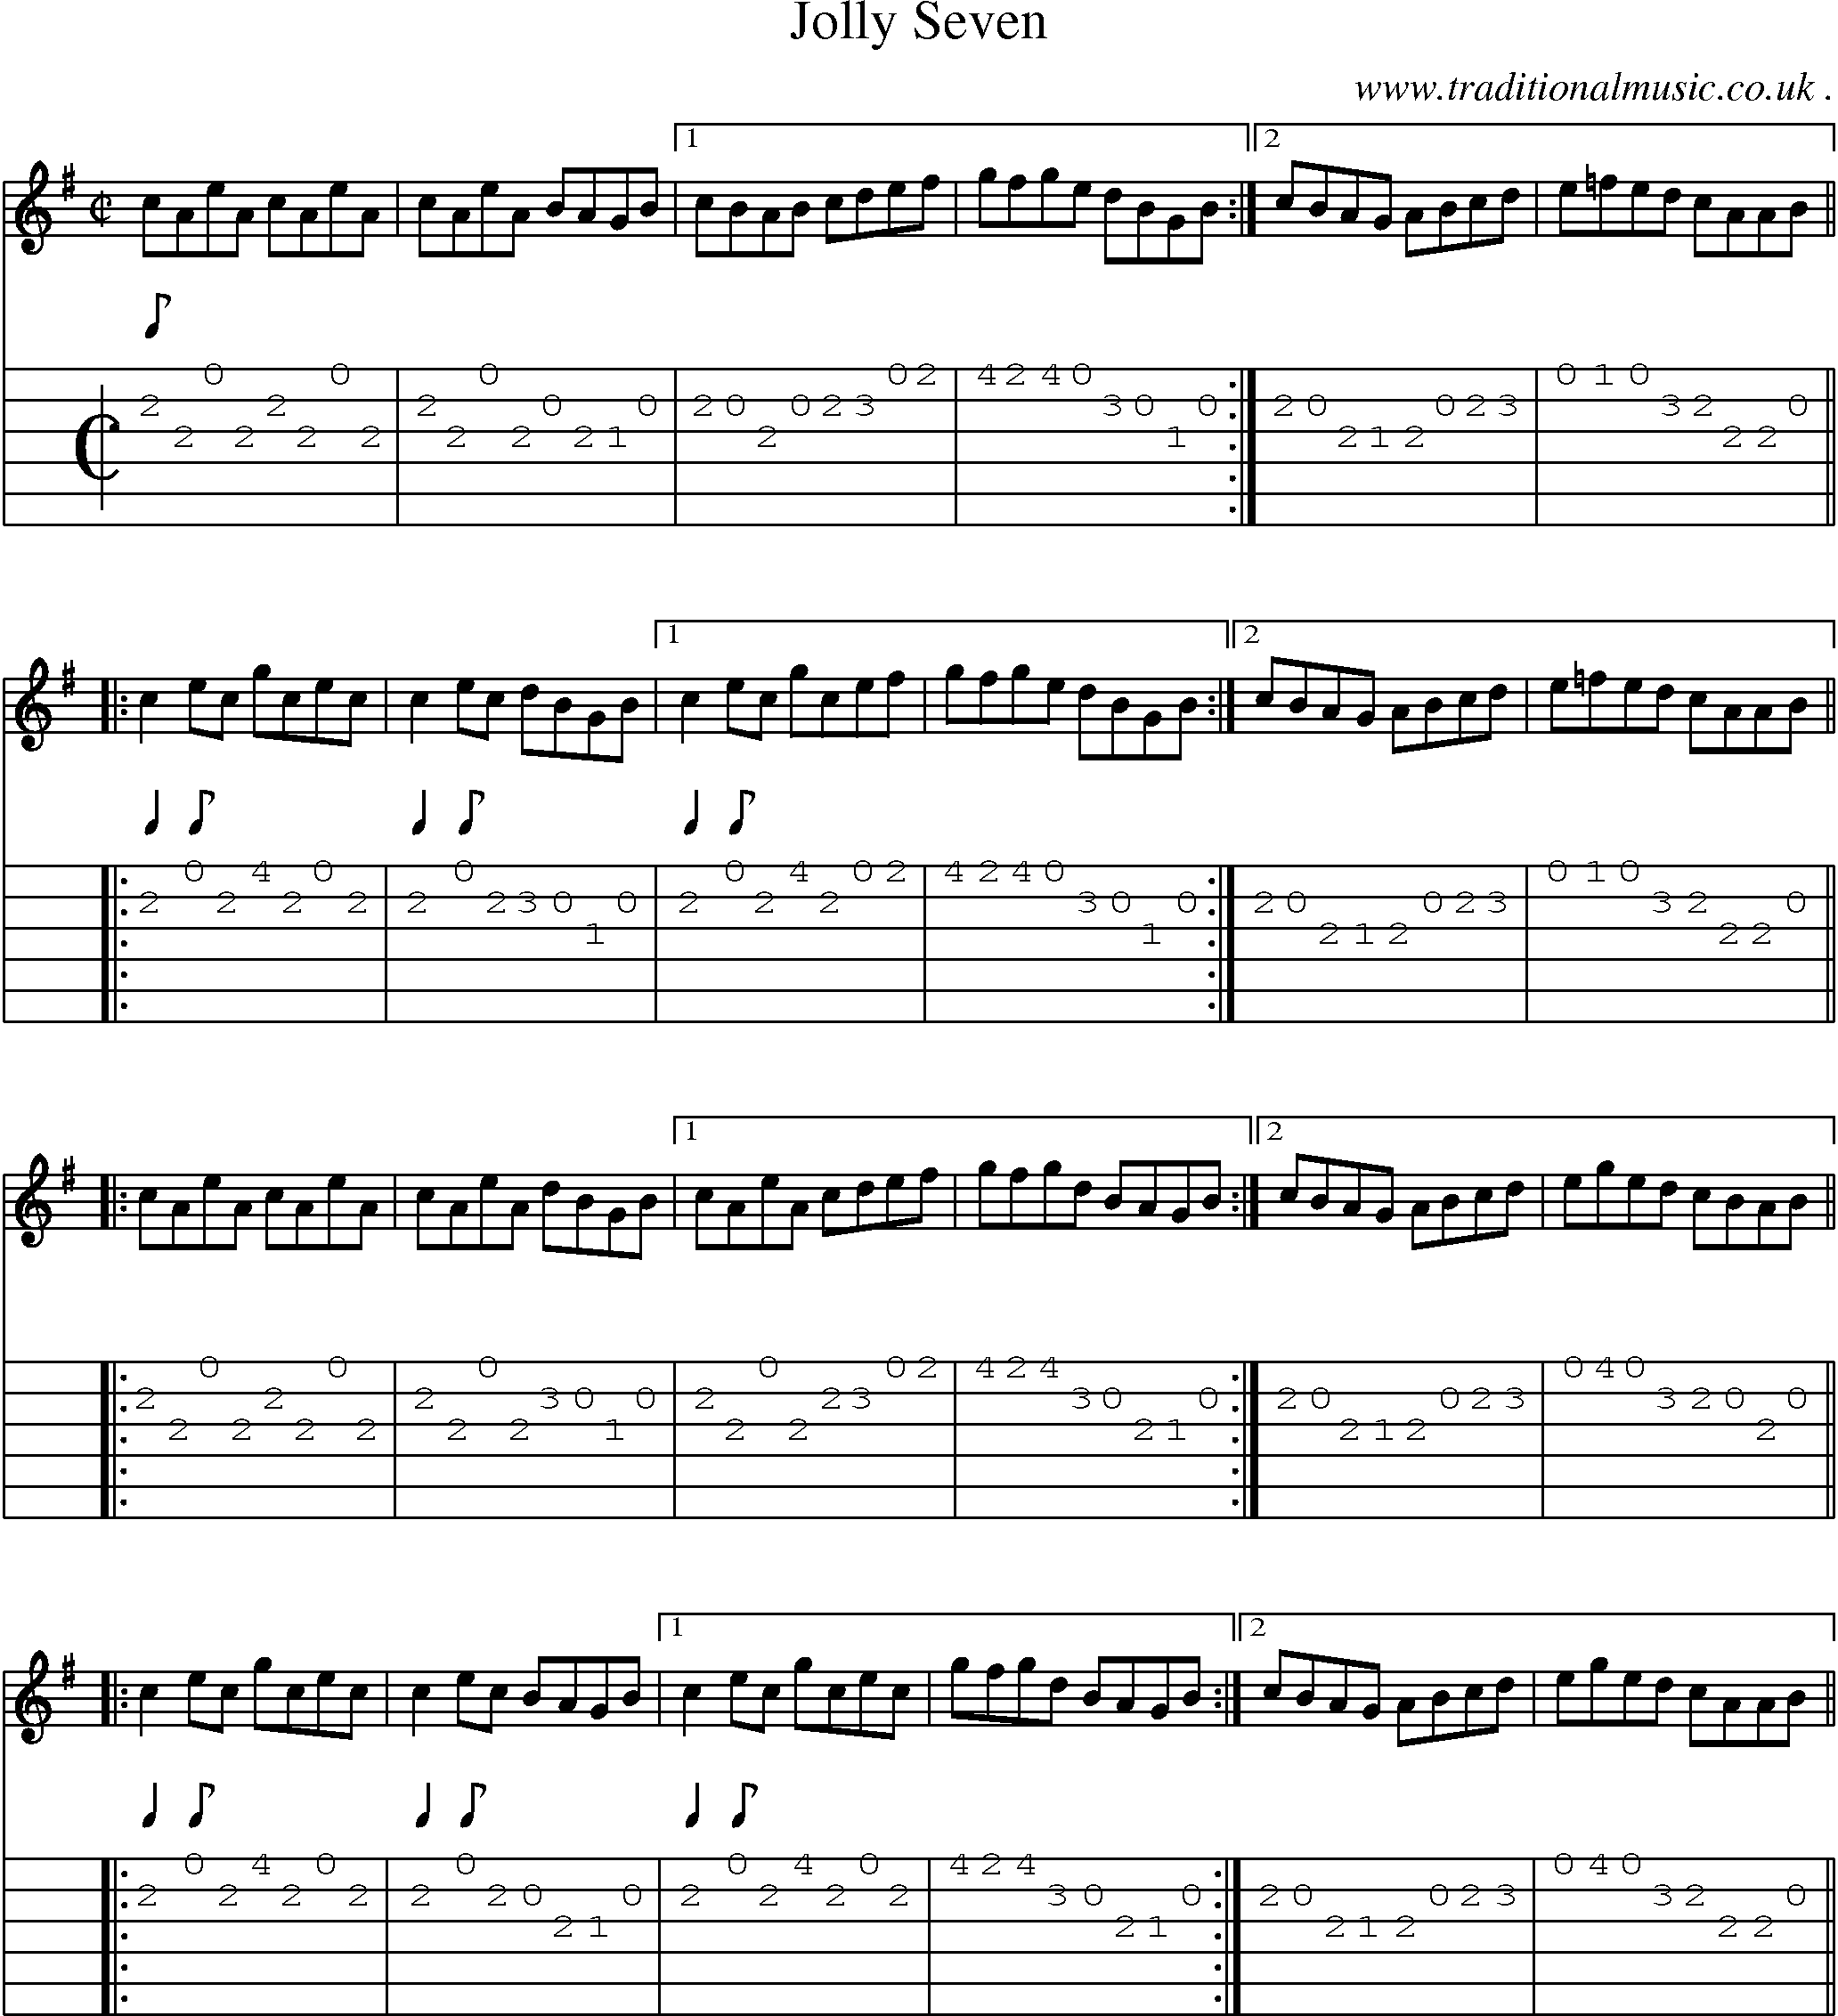 Sheet-Music and Guitar Tabs for Jolly Seven